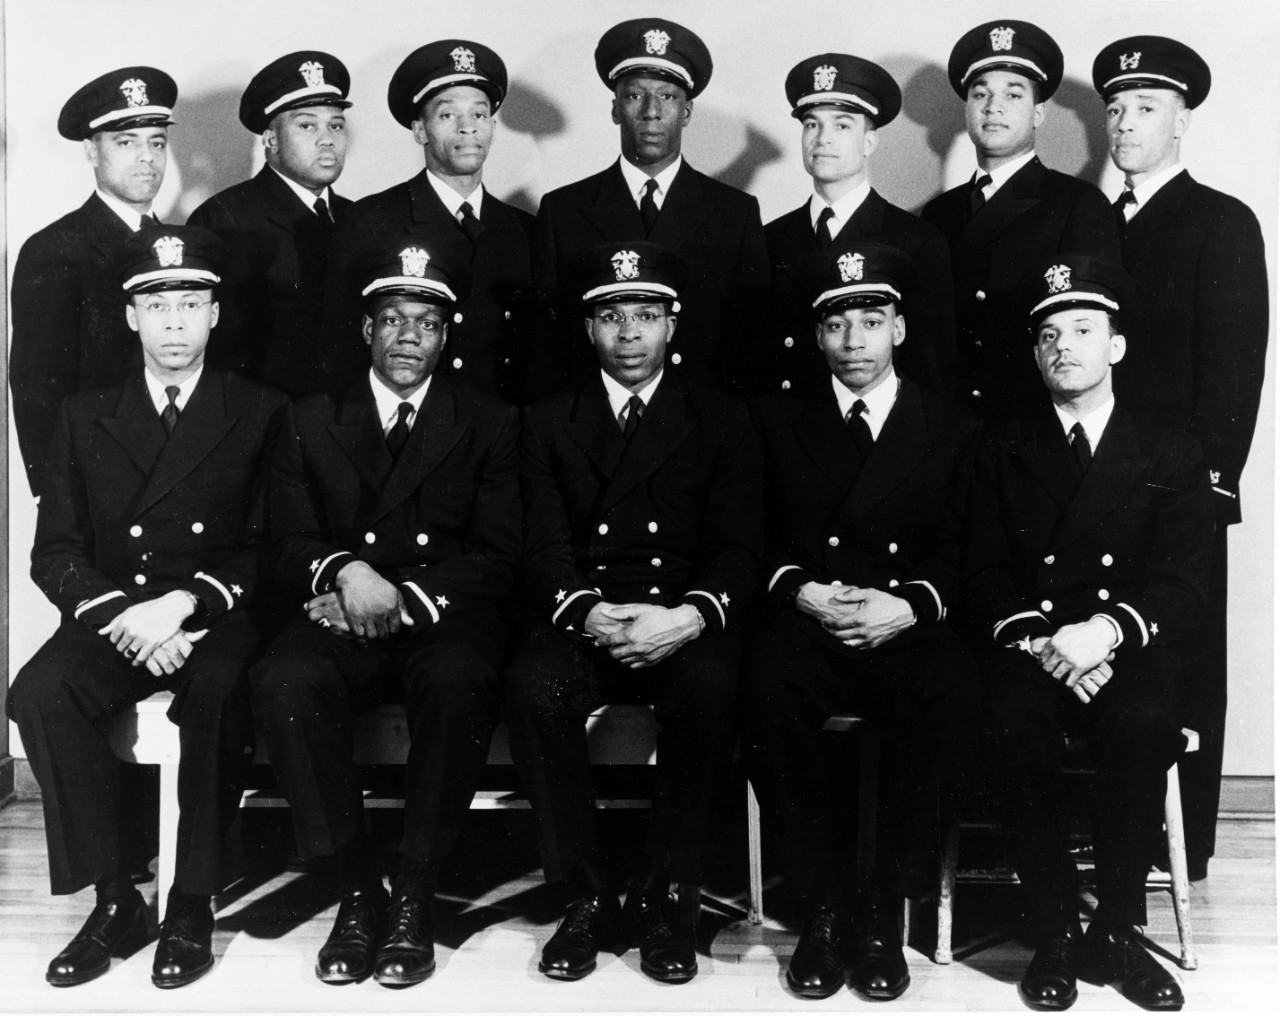 Photo #: 80-G-300215  First African-American U.S. Navy Officers